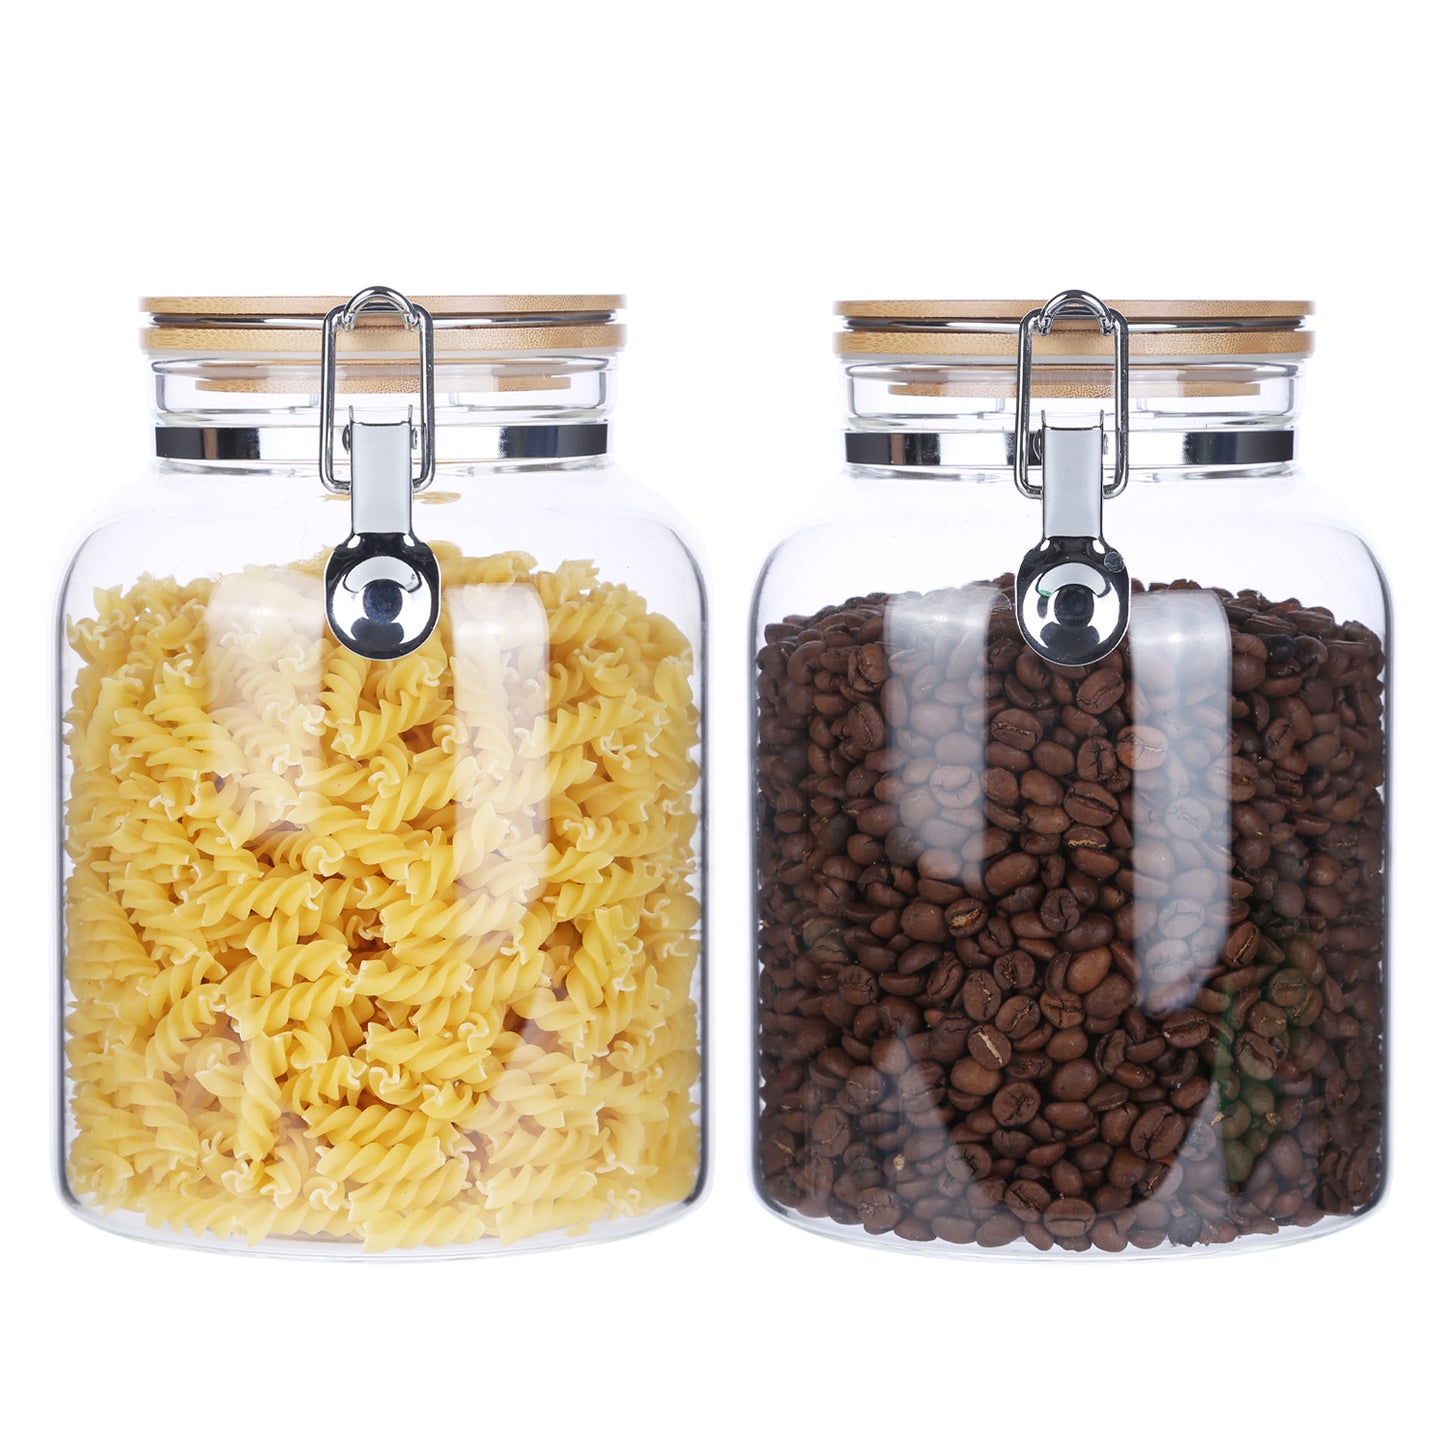 KKC Glass Coffee K Cup,Coffee Pod Storage Container,Sealed Glass Coffee Container for 24 oz (1.5 lb) Coffee Beans,Large Glass Storage Jar Canisters with Airtight Locking Hinged Lids for Flour,Brown Sugar,Cookies,Candy,Pasta,Grains,68 Fluid-oz